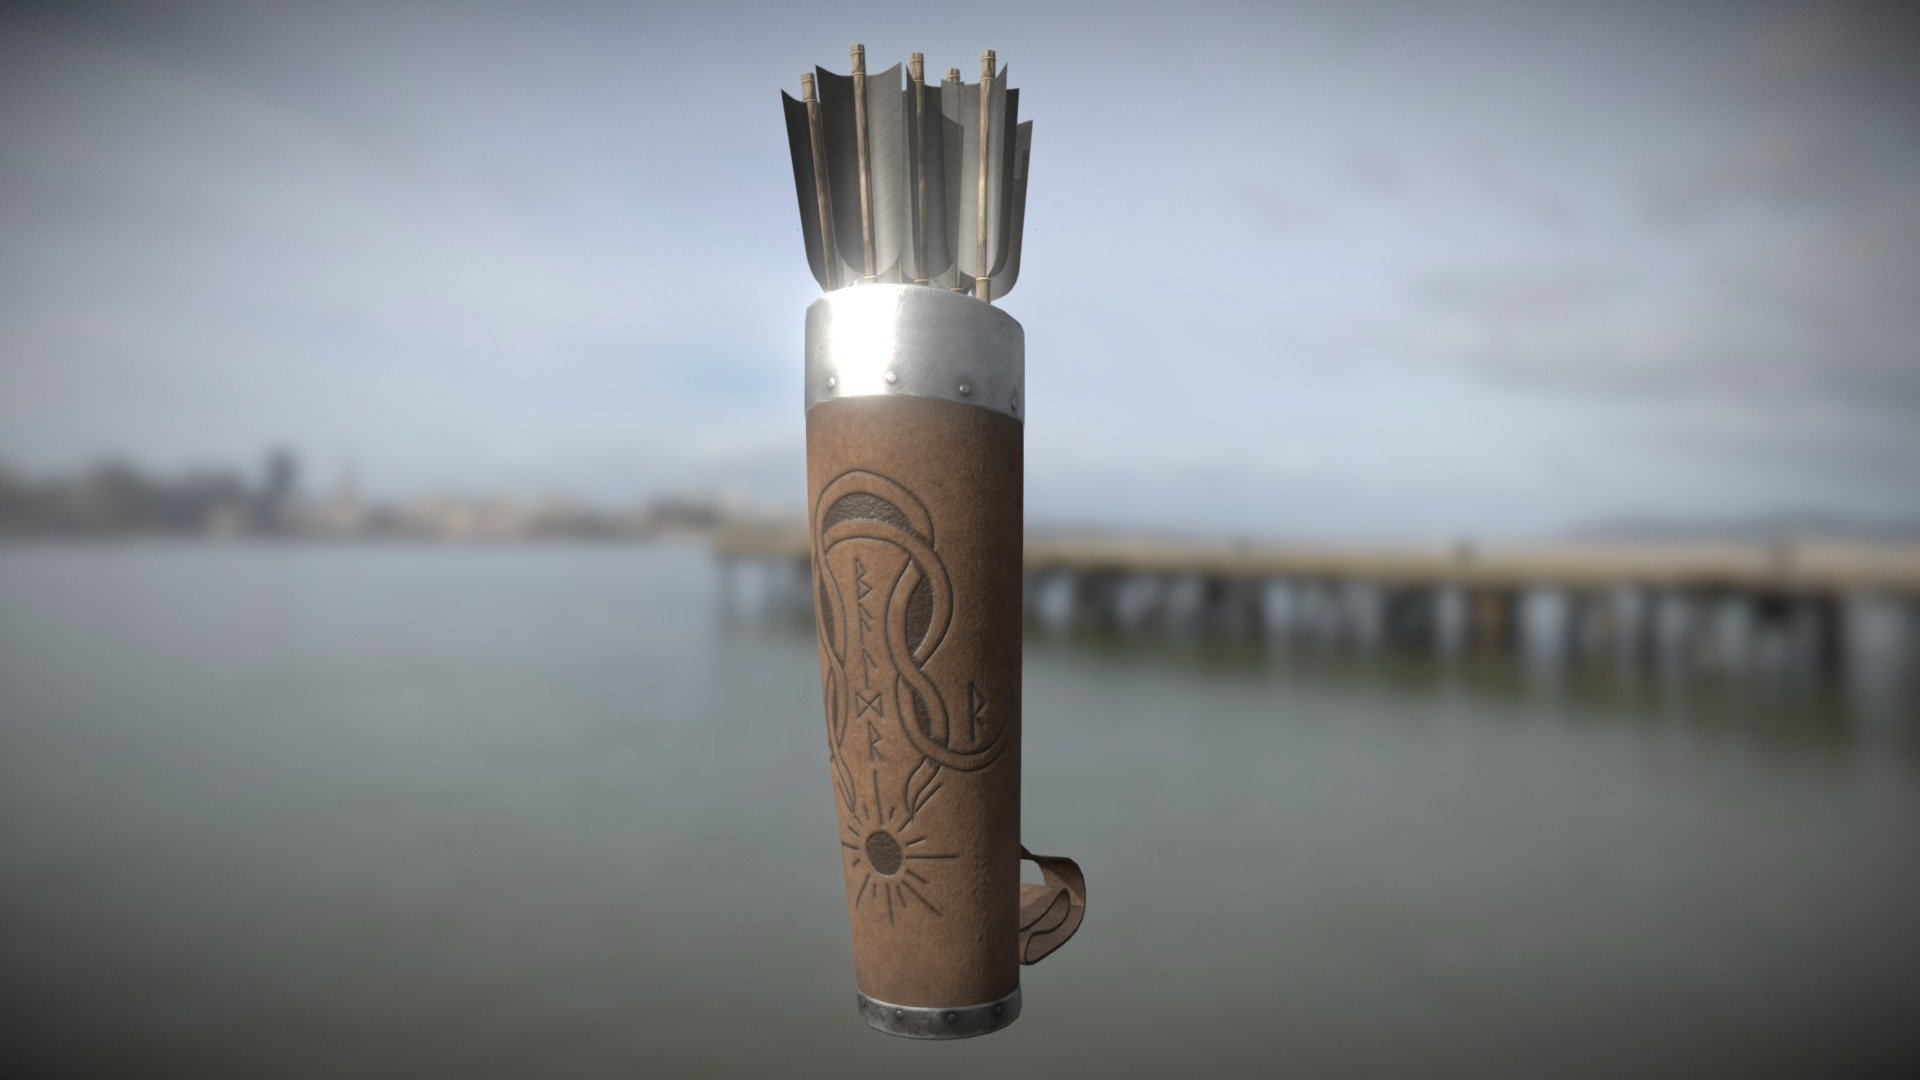 Wanted to make something again but I didn't know what so here's a quiver! The reason I put Baldr (runes) on there is because I was originally going to put mistletoe branches where the normal knot is now. Kinda ironic making a quiver for Baldr huh? - Baldr Quiver - 3D model by Fikhra 3d model